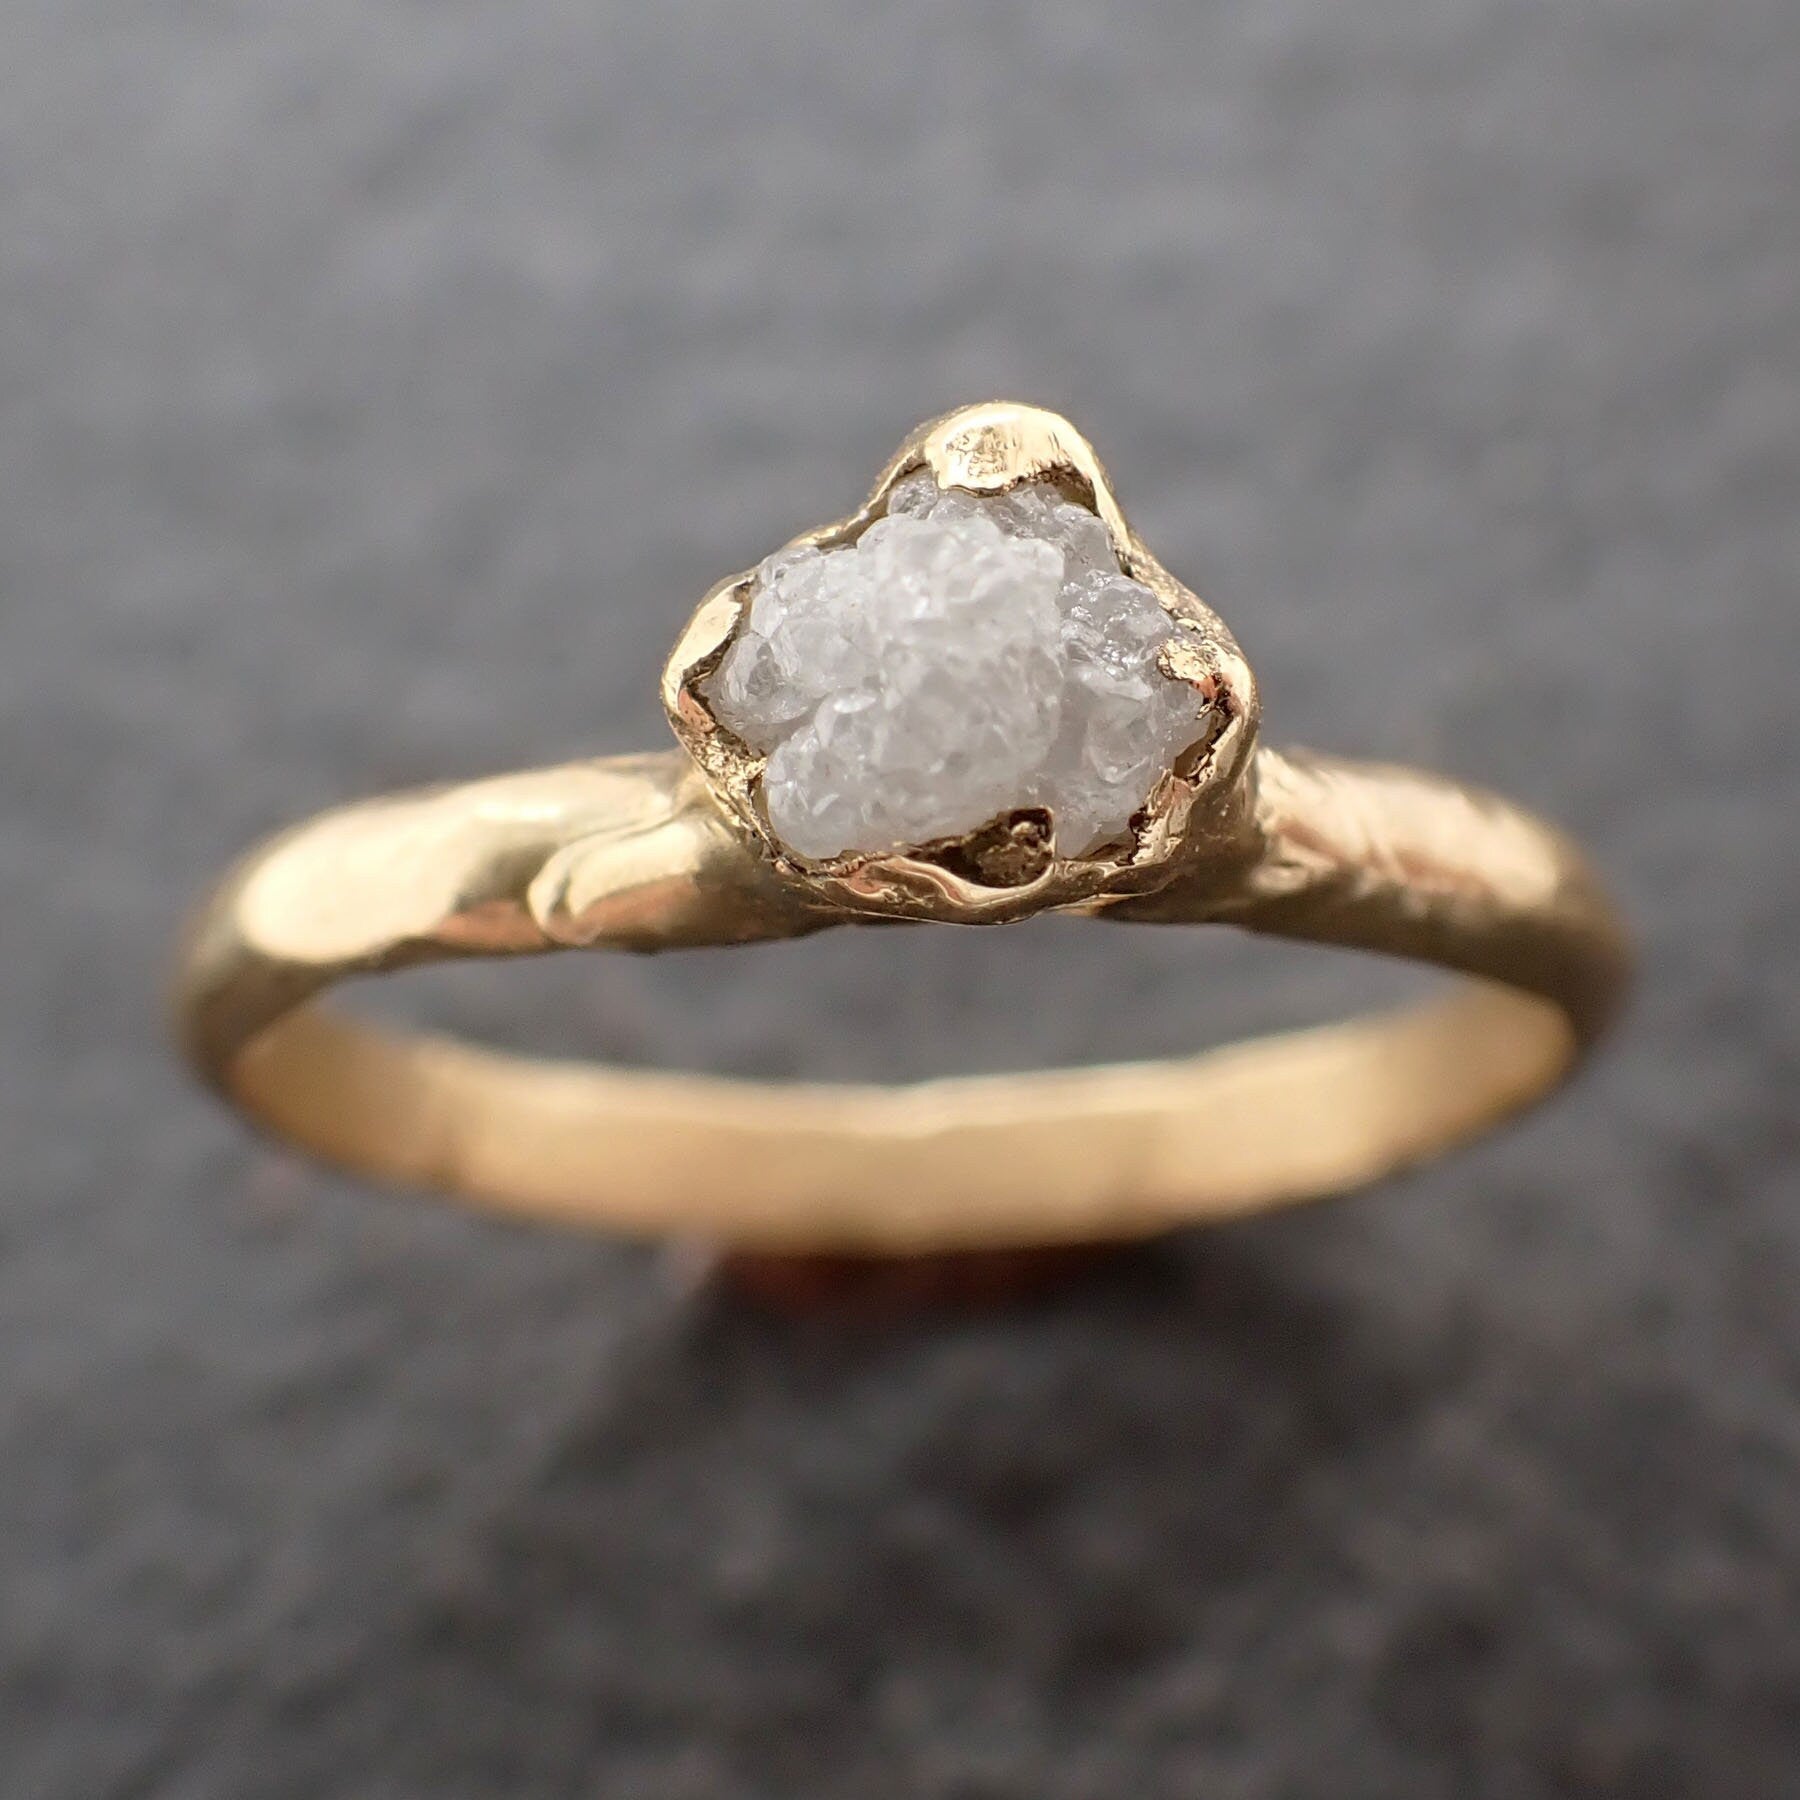 Raw Rough UnCut Diamond Engagement Ring Rough Diamond Solitaire Recycled 18k gold Conflict Free Diamond Wedding Promise byAngeline 3086